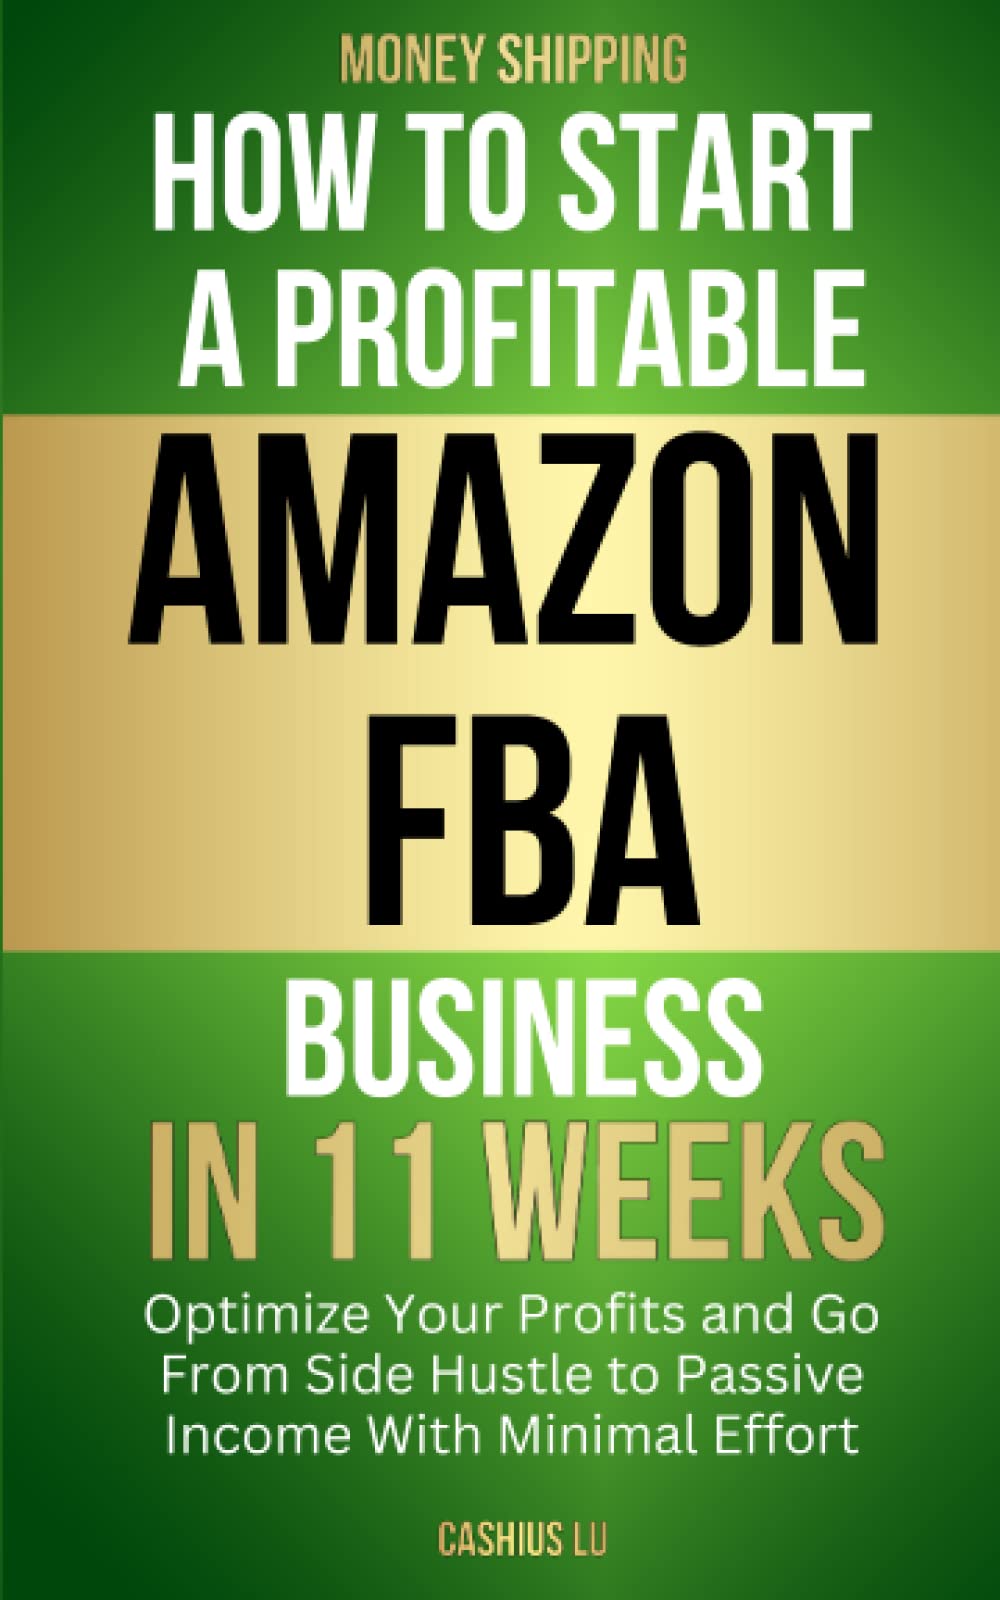 MONEY SHIPPING: How To Start A Profitable Amazon FBA Business In 11 Weeks: Optimize Your Profits and Go From Side Hustle to Passive Income With Minimal Effort